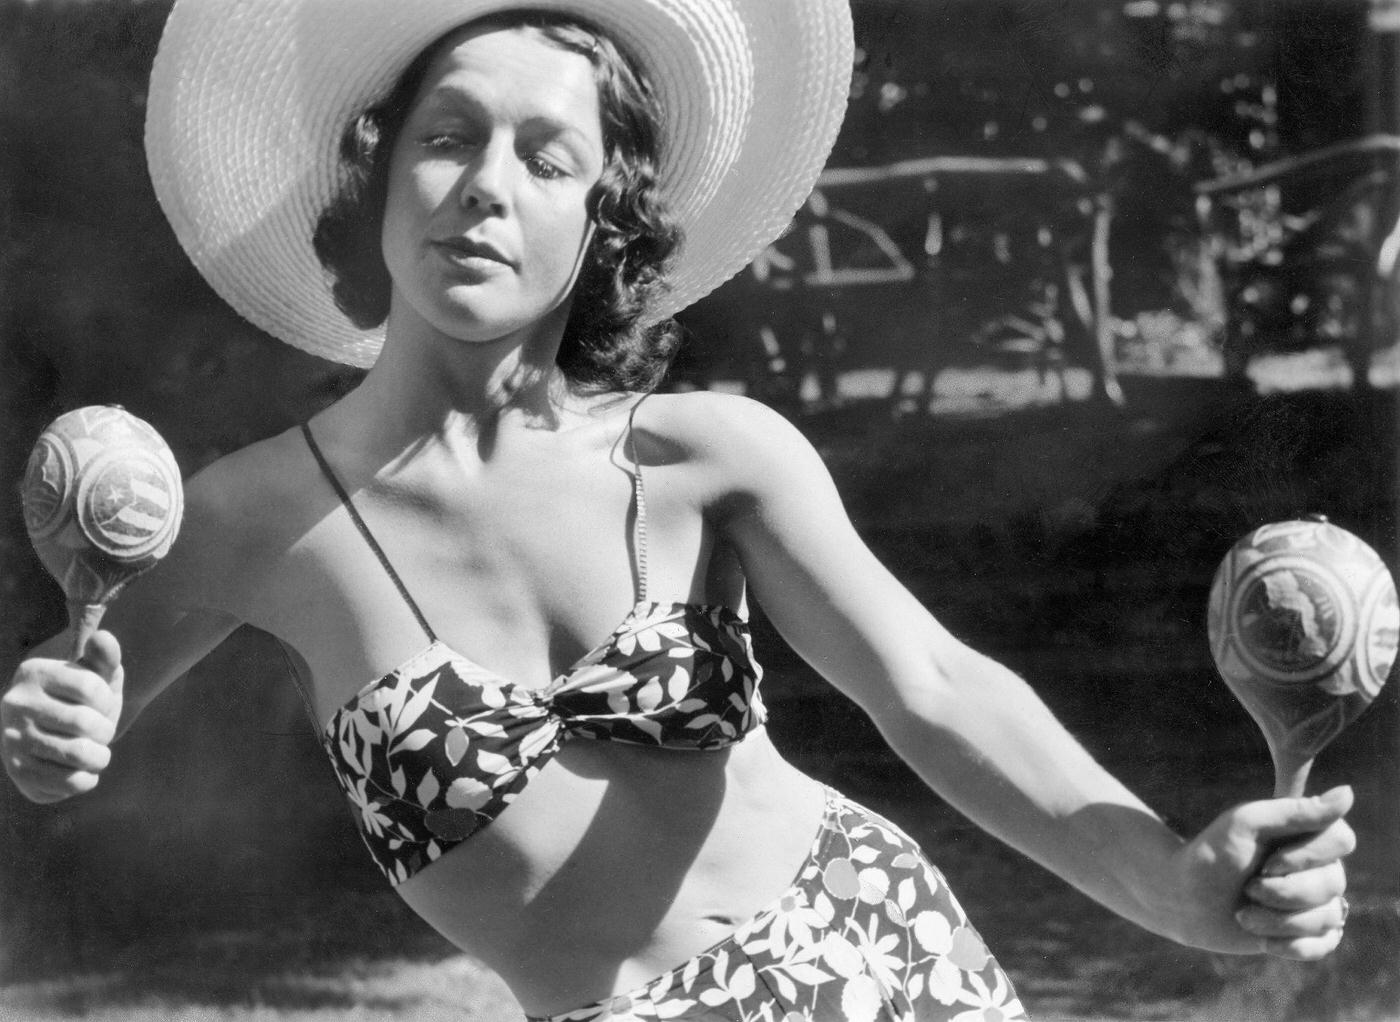 Ilse Meudtner, dancer, Germany, posing in a bikini with a straw hat and rattles